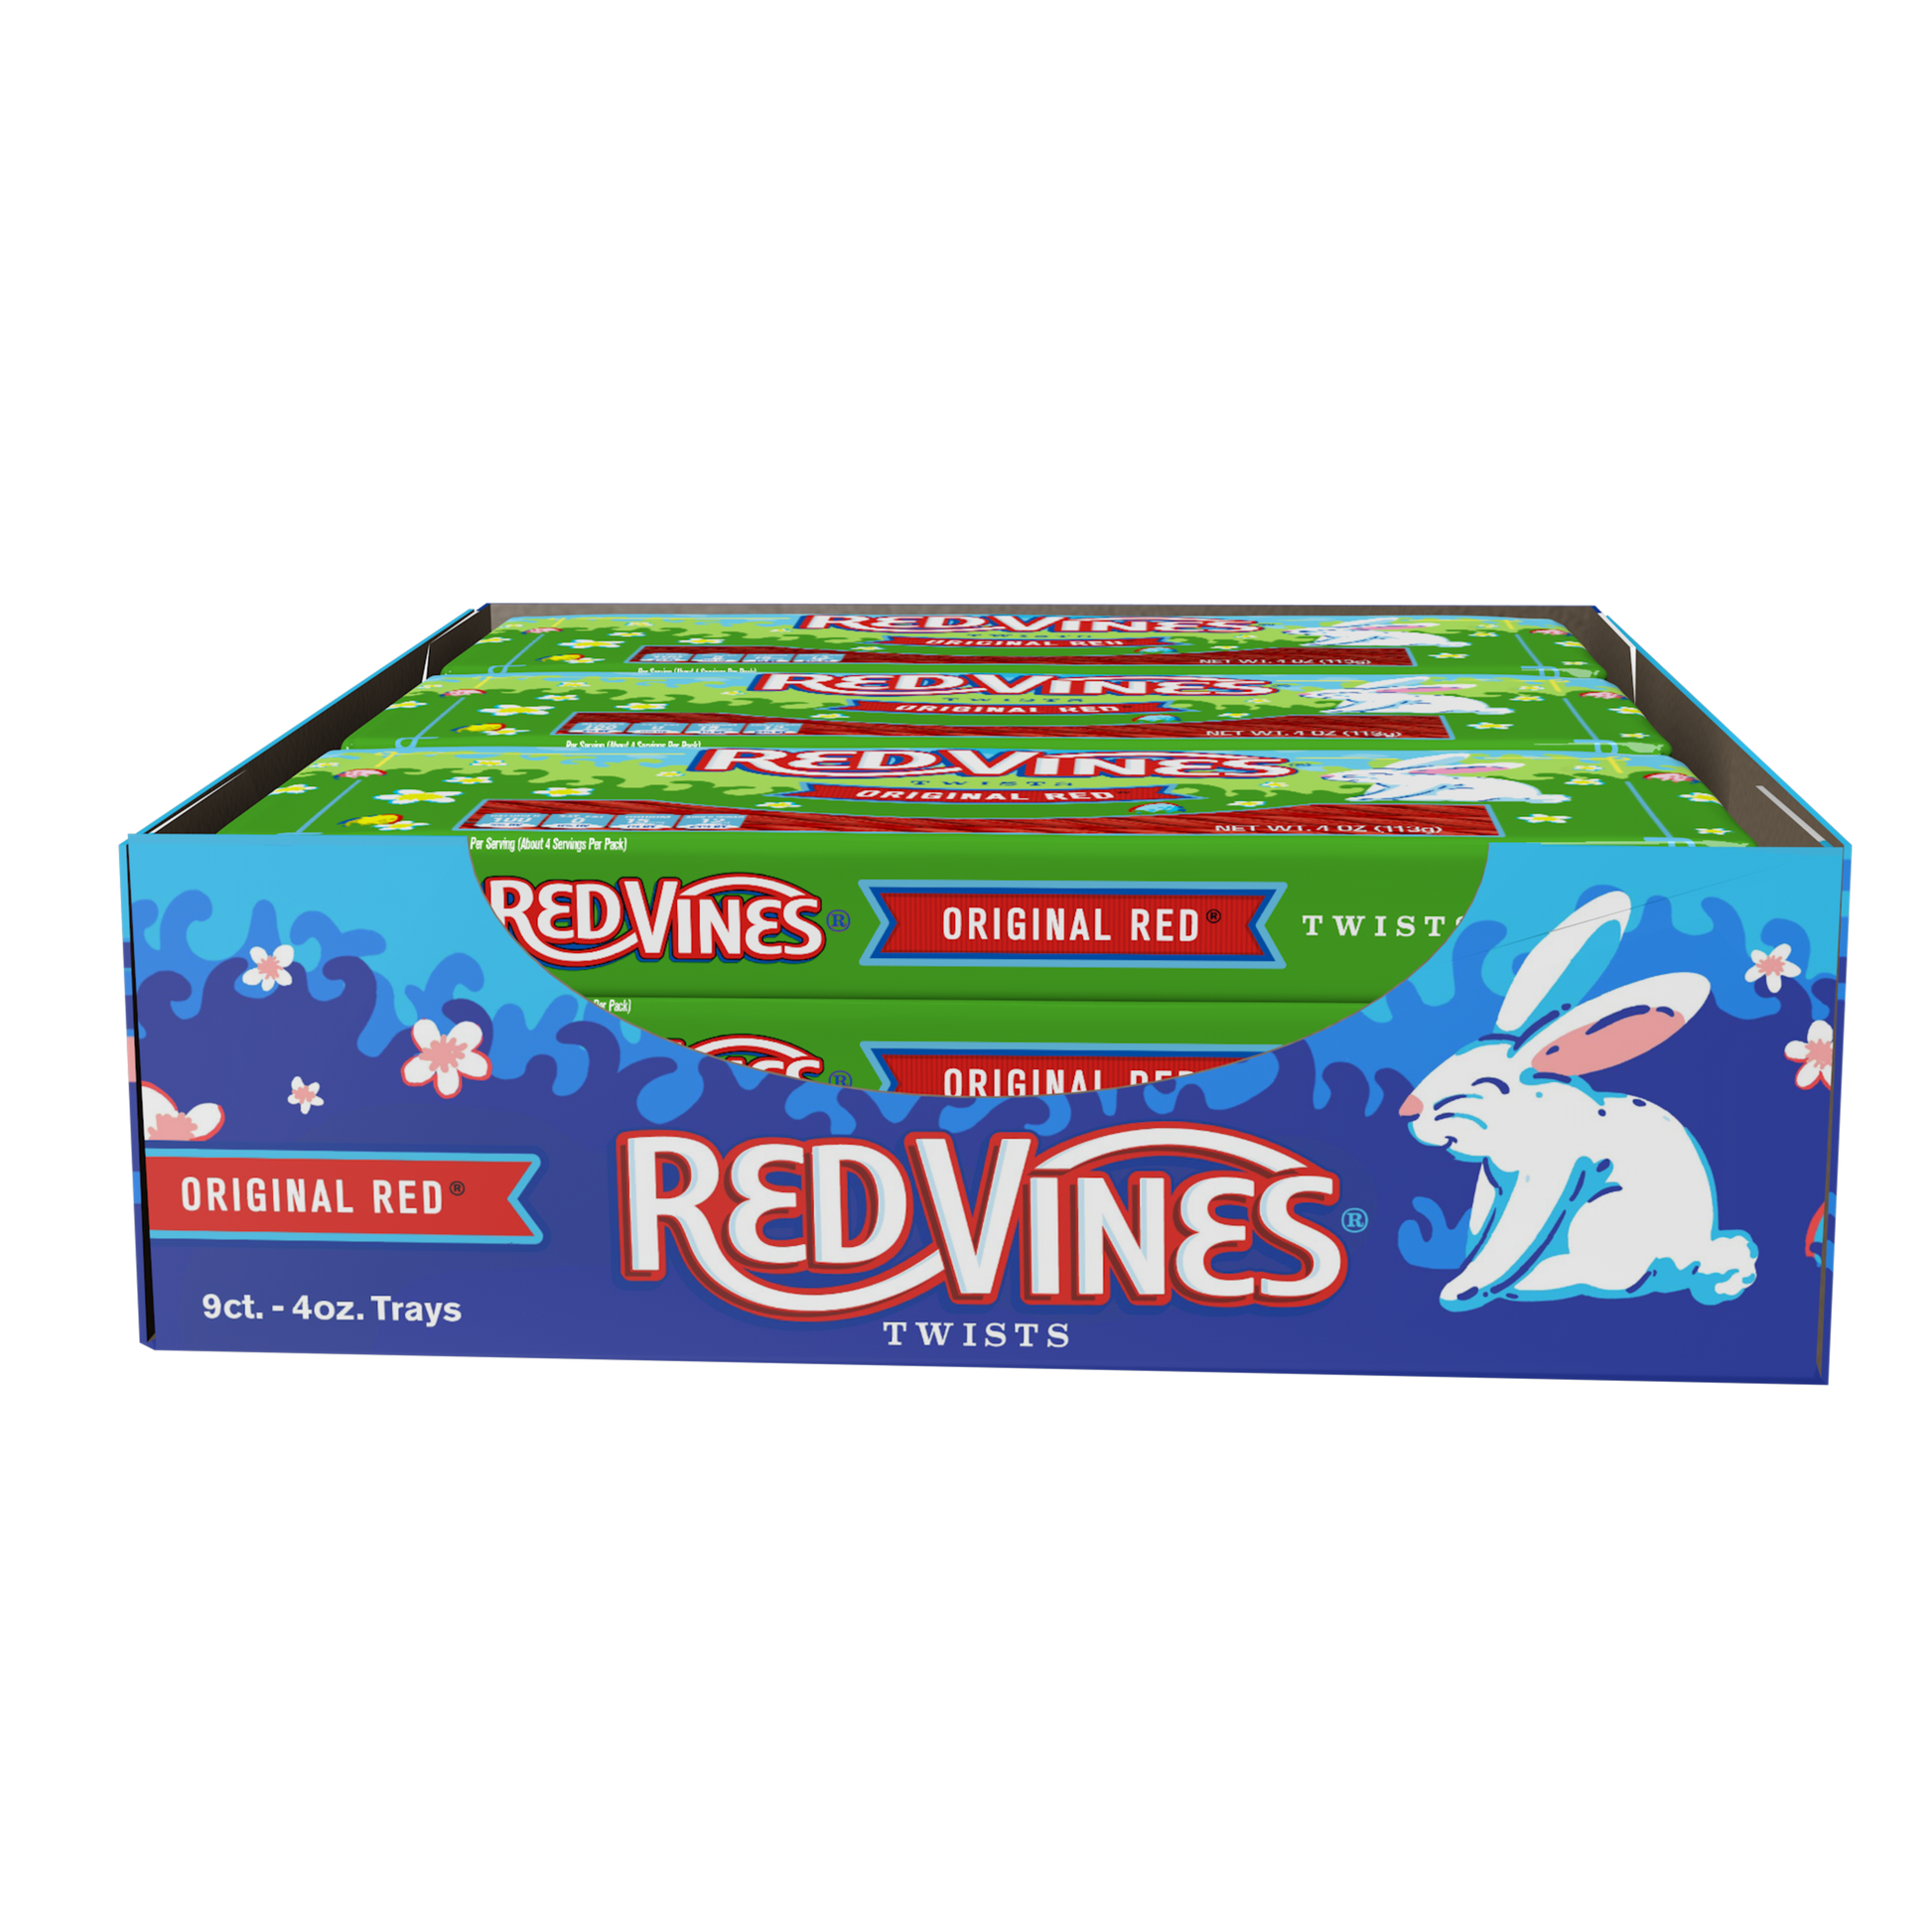 36 count box of RED VINES Easter Candy 4oz Trays